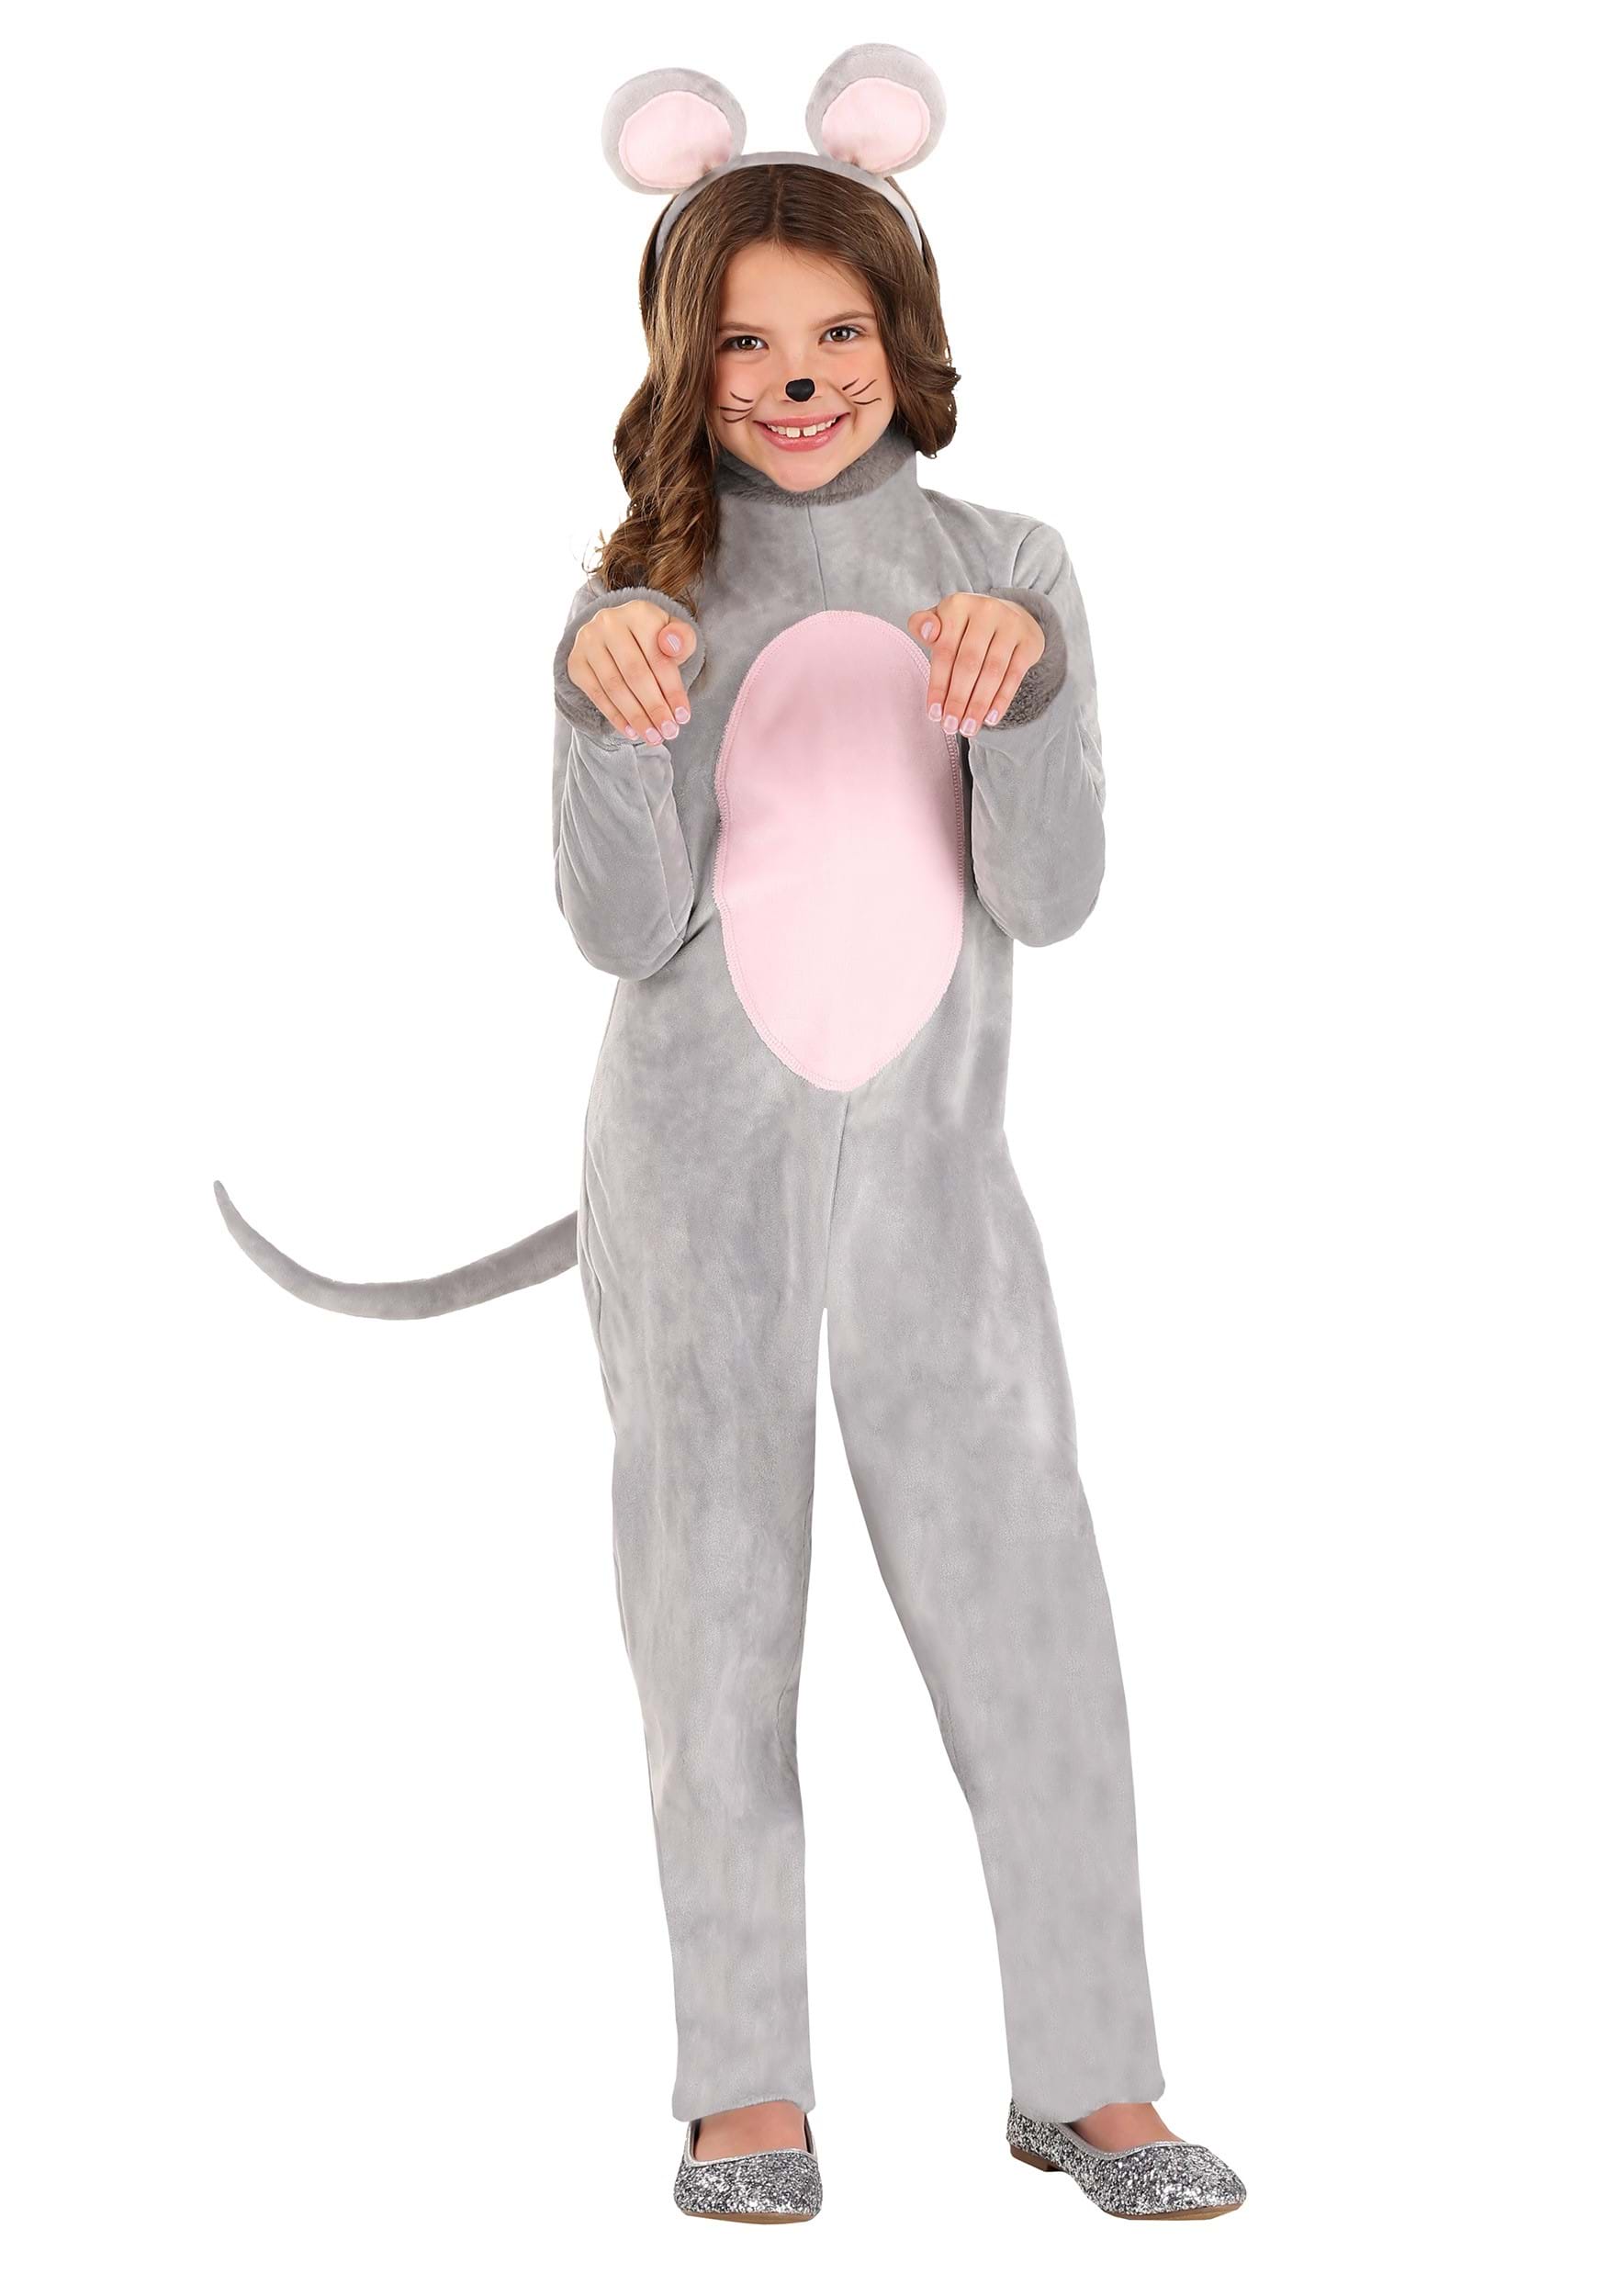 Photos - Fancy Dress Cozy FUN Costumes Child  Mouse Costume | Kid's Animal Costumes Gray/Pin 